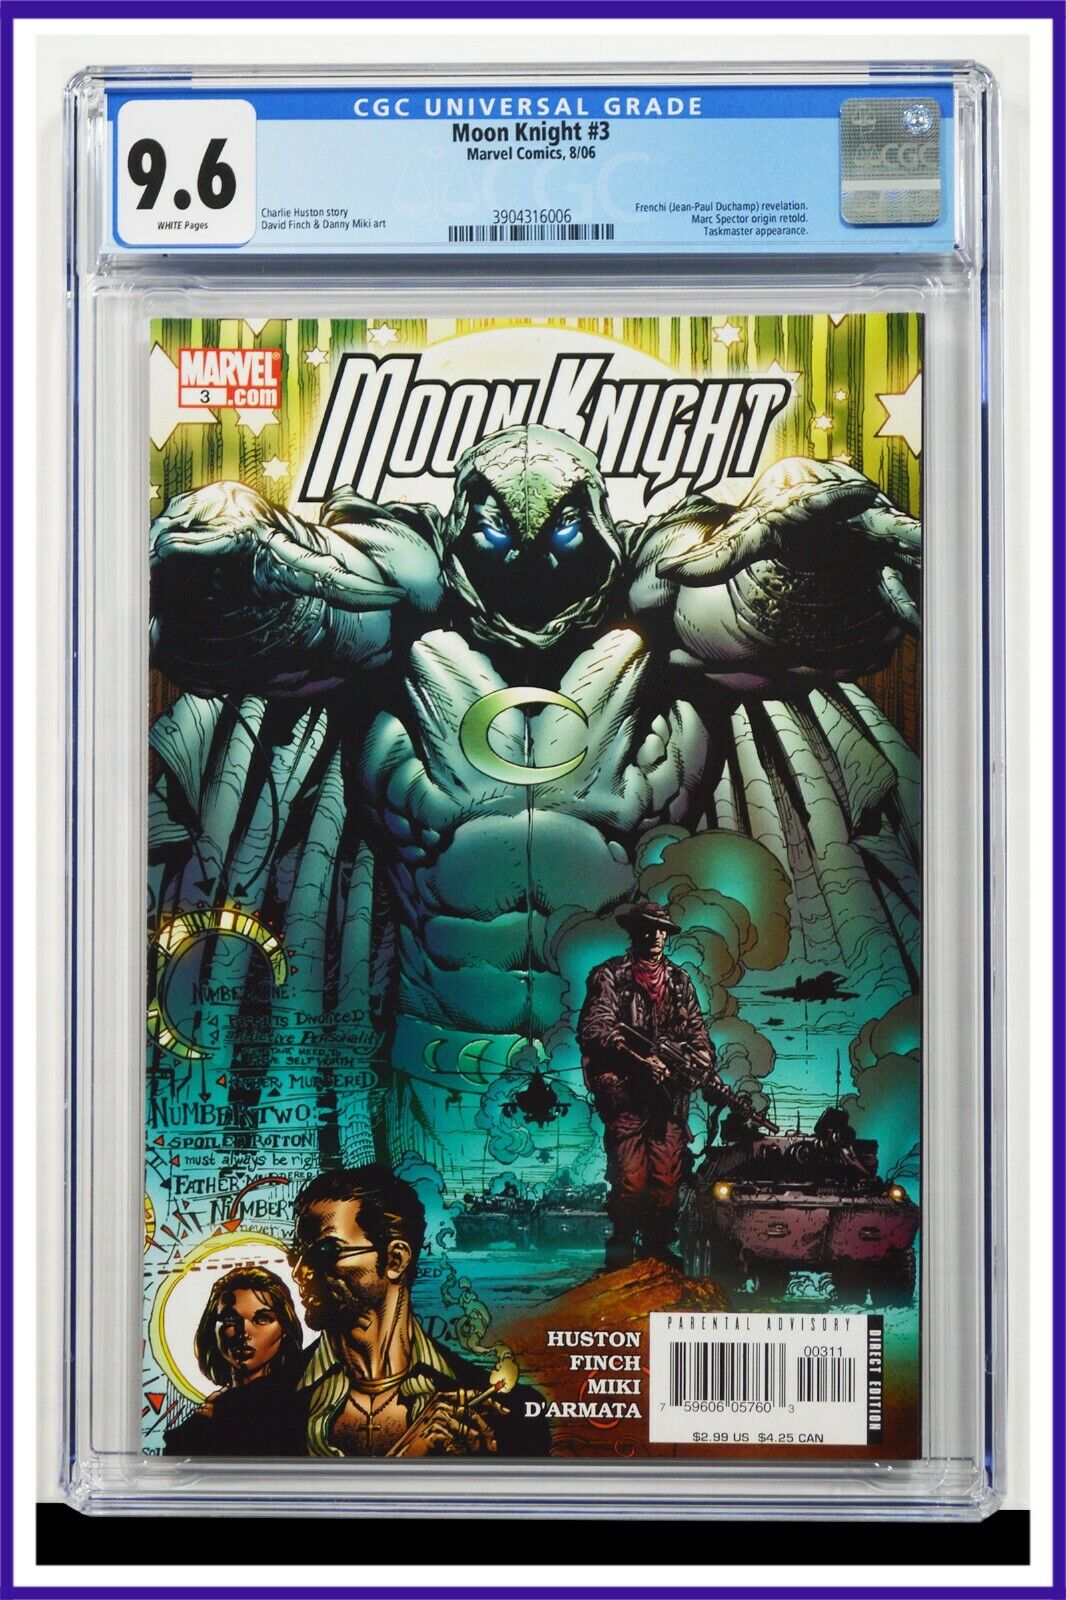 Moon Knight #3 CGC Graded 9.6 Marvel August 2006 White Pages Comic Book.